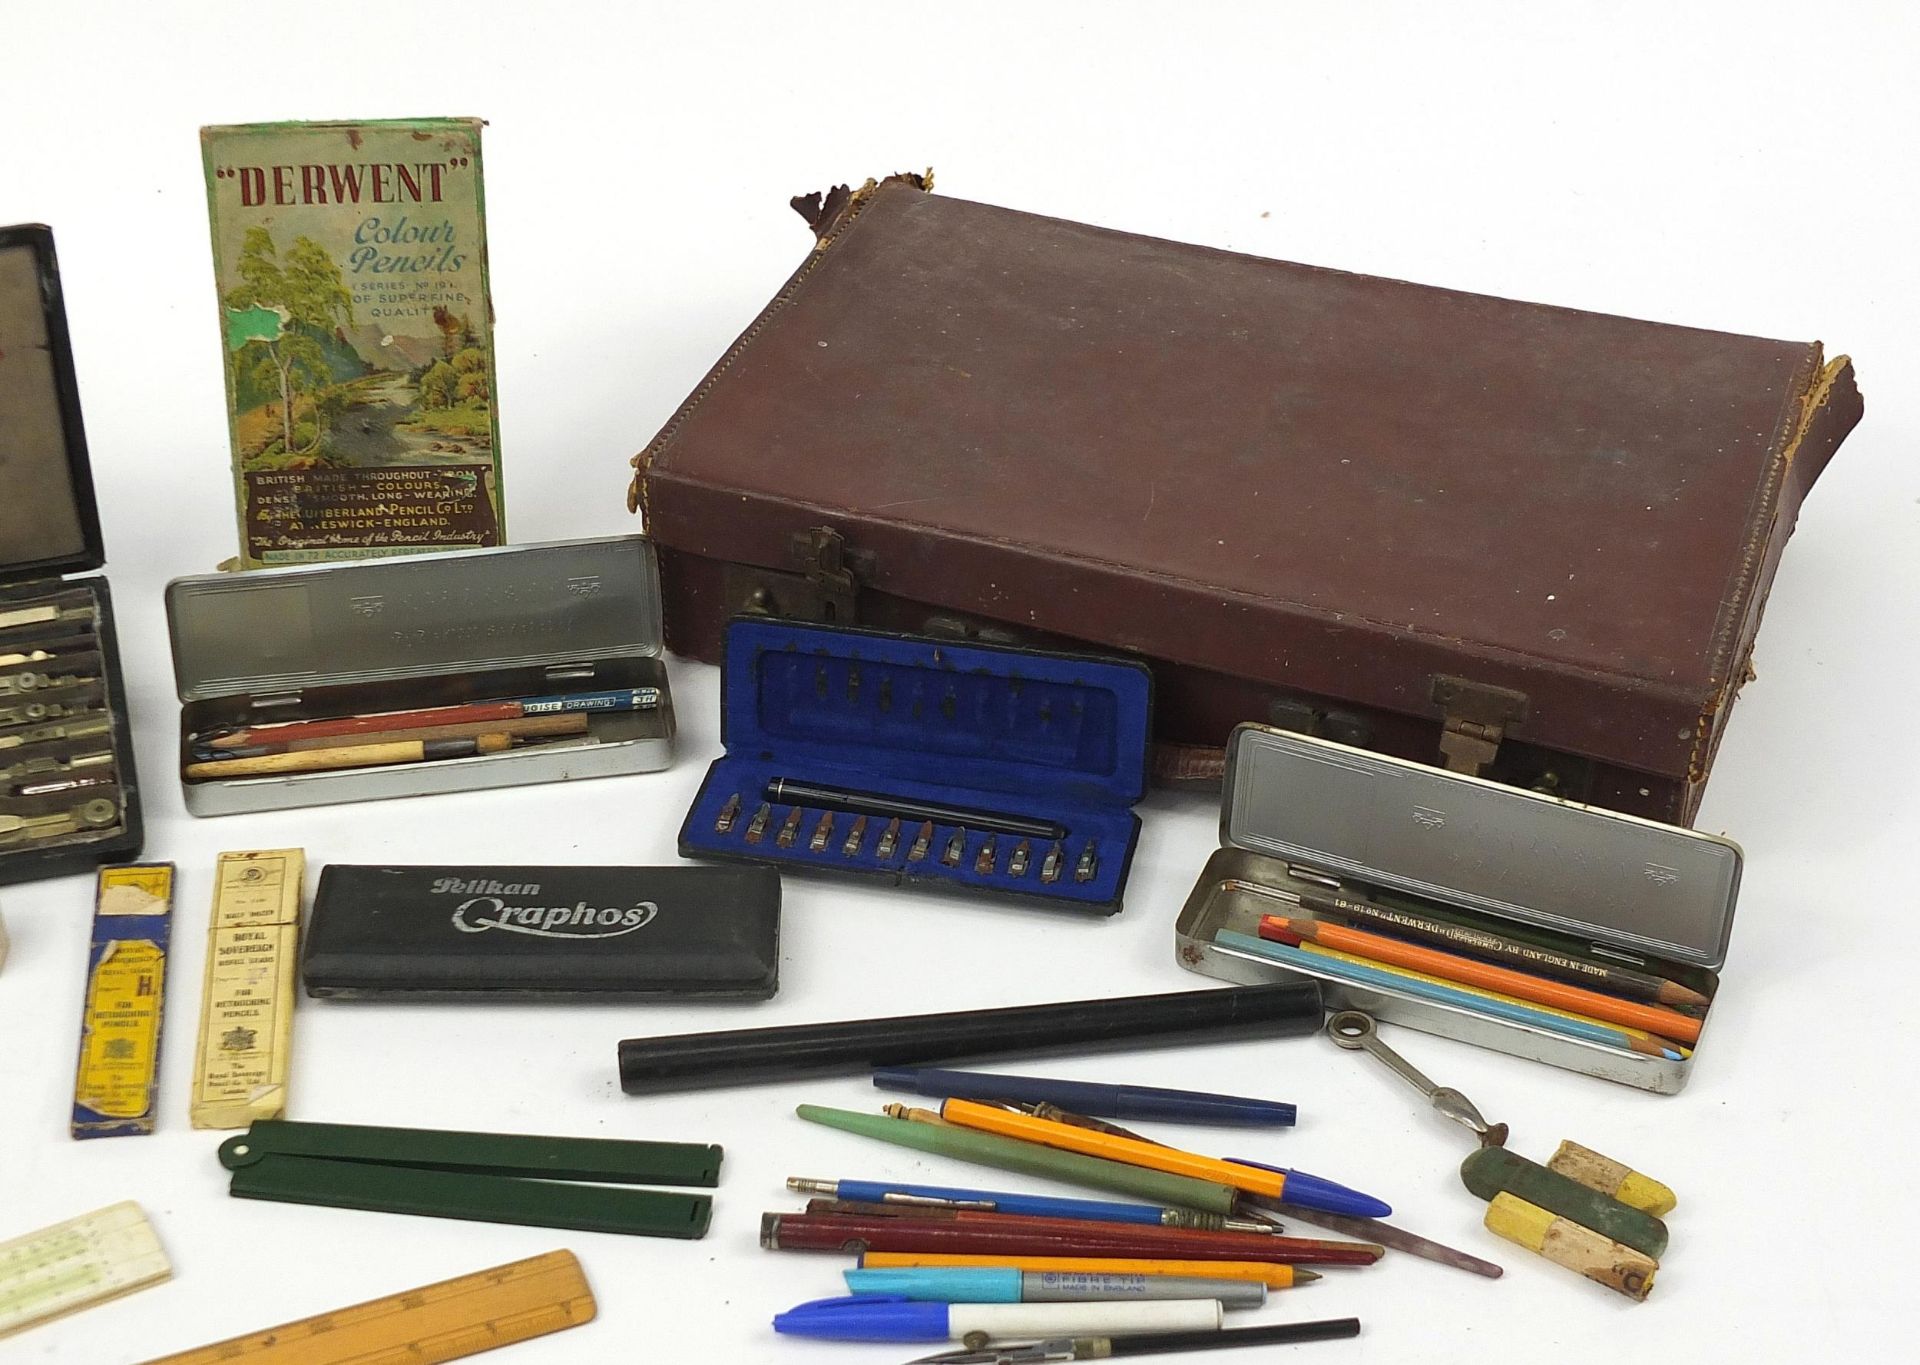 Vintage drawing instruments and apparatus including cased sets and wooden rules - Image 4 of 5